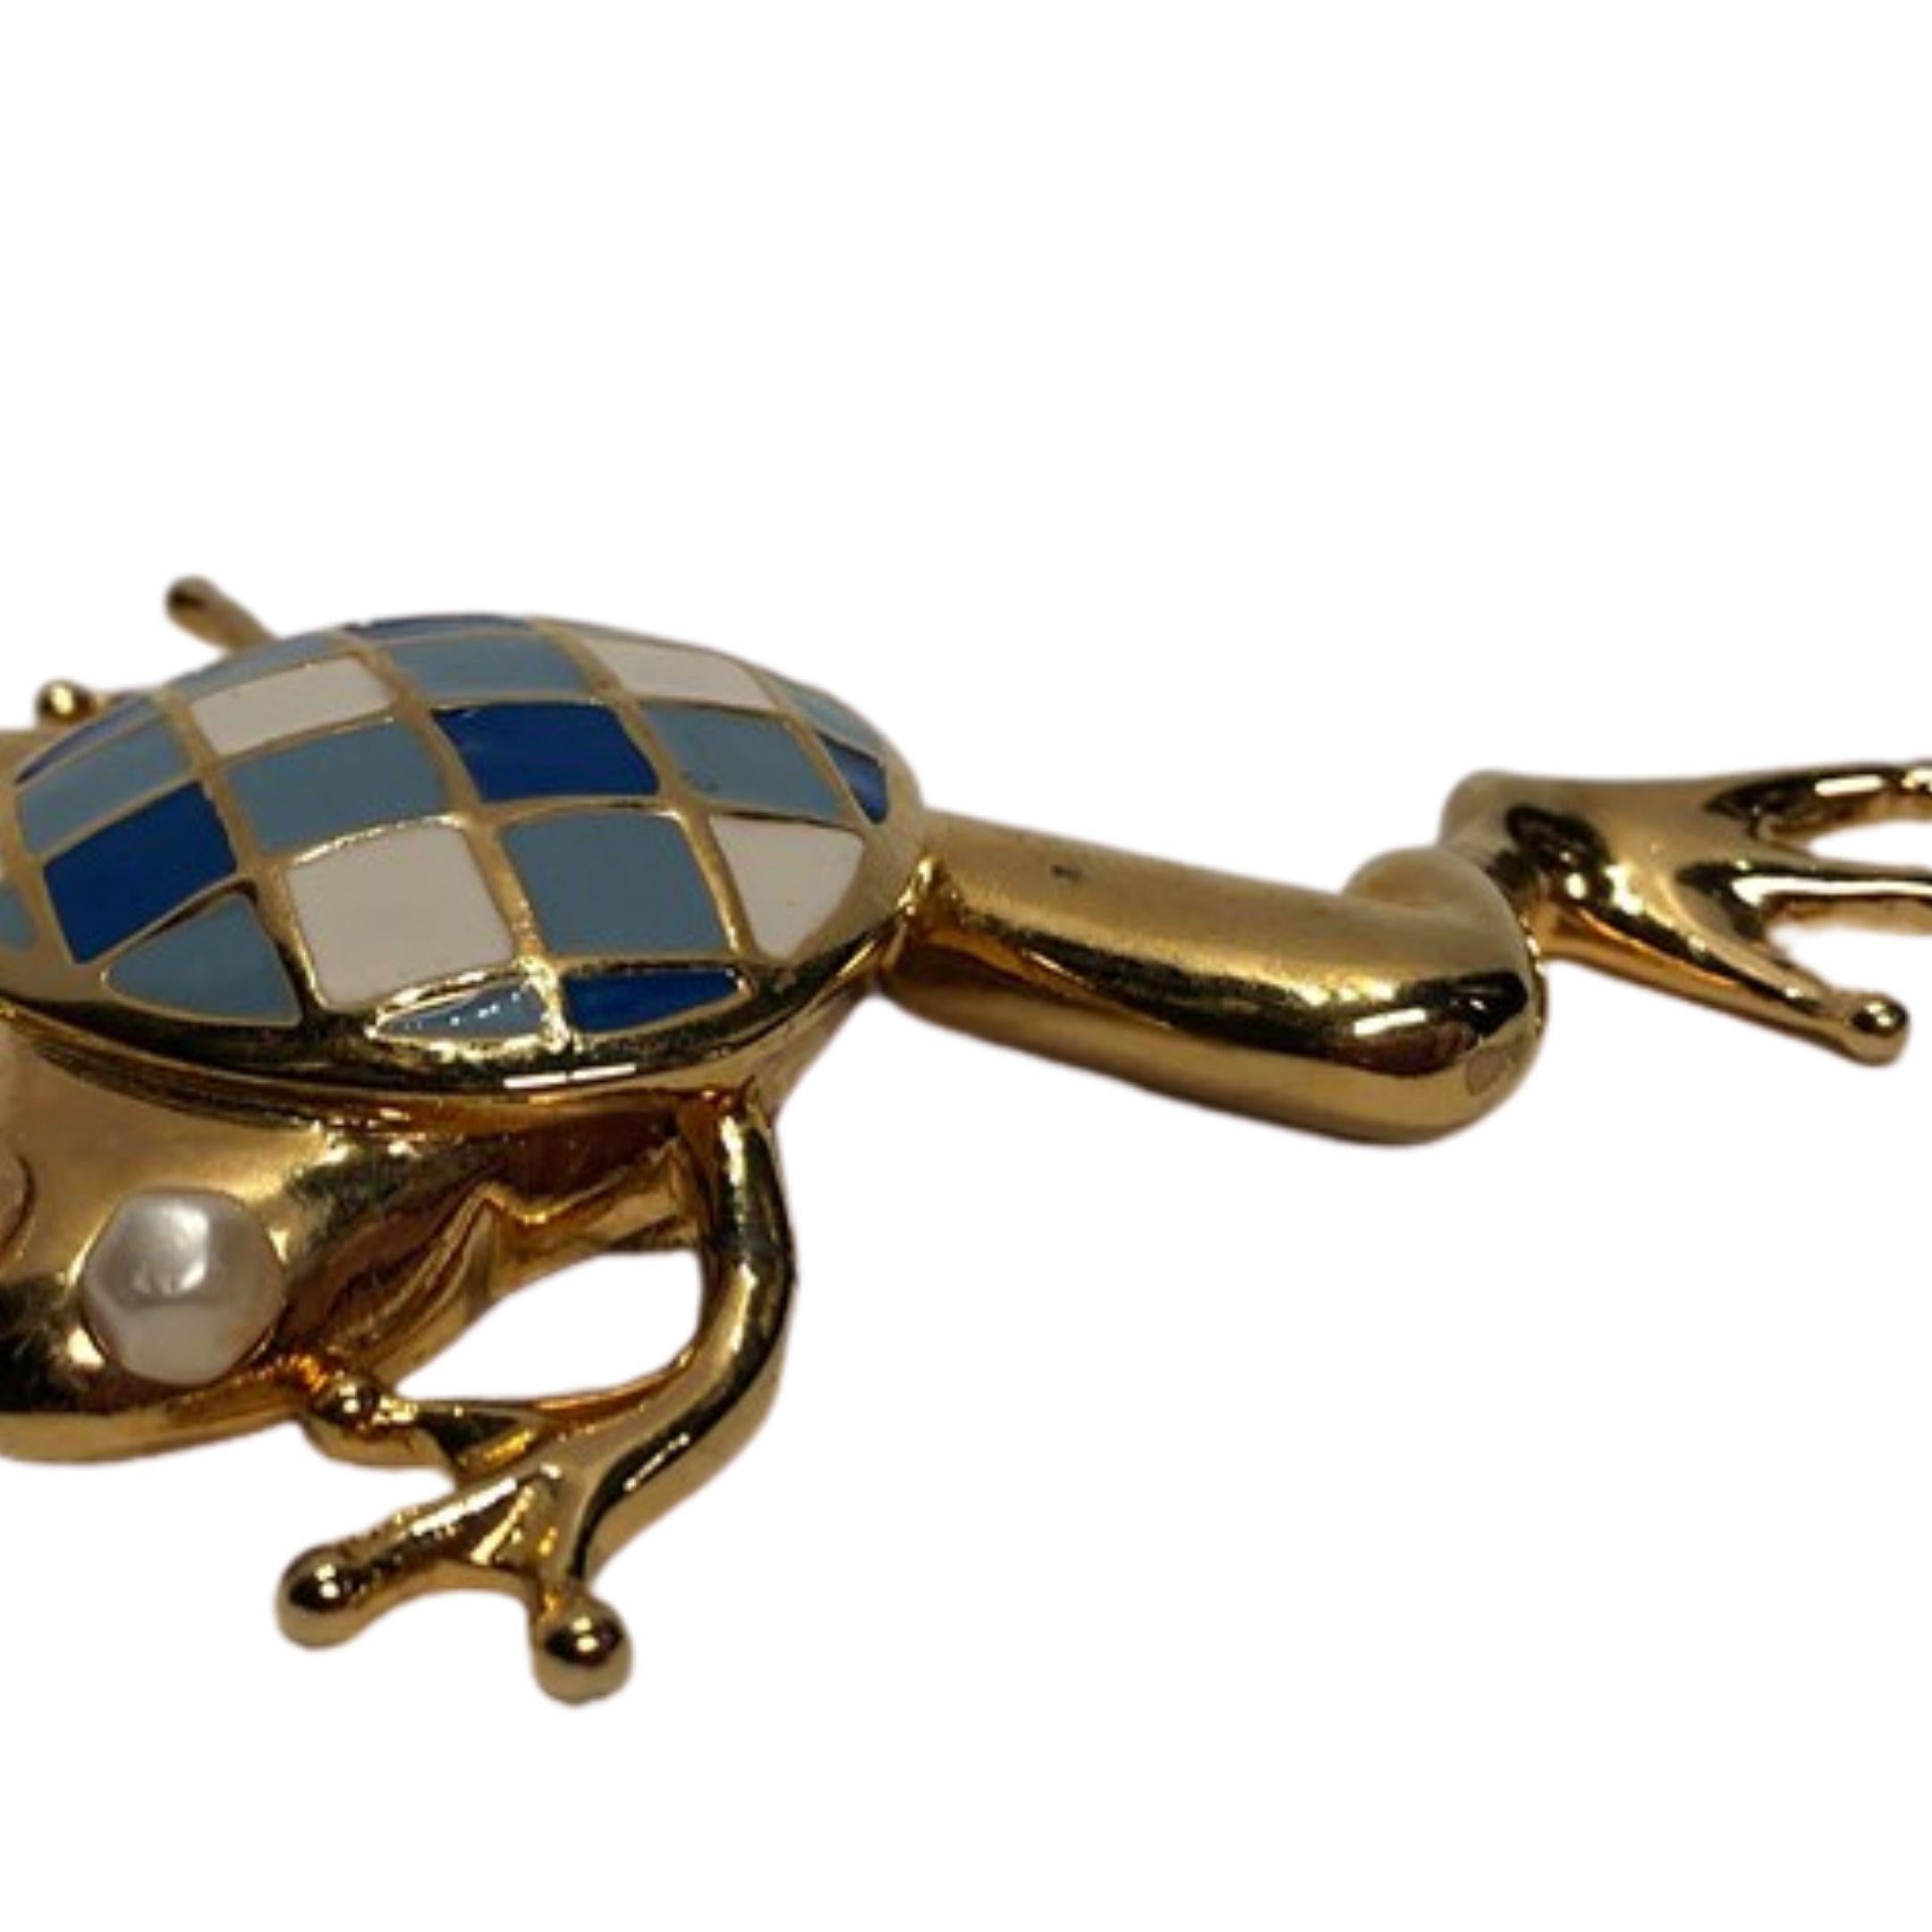 Rare vintage gold toned Valentino frog brooch with blue and white enamel detailing and faux pearl eye balls.

